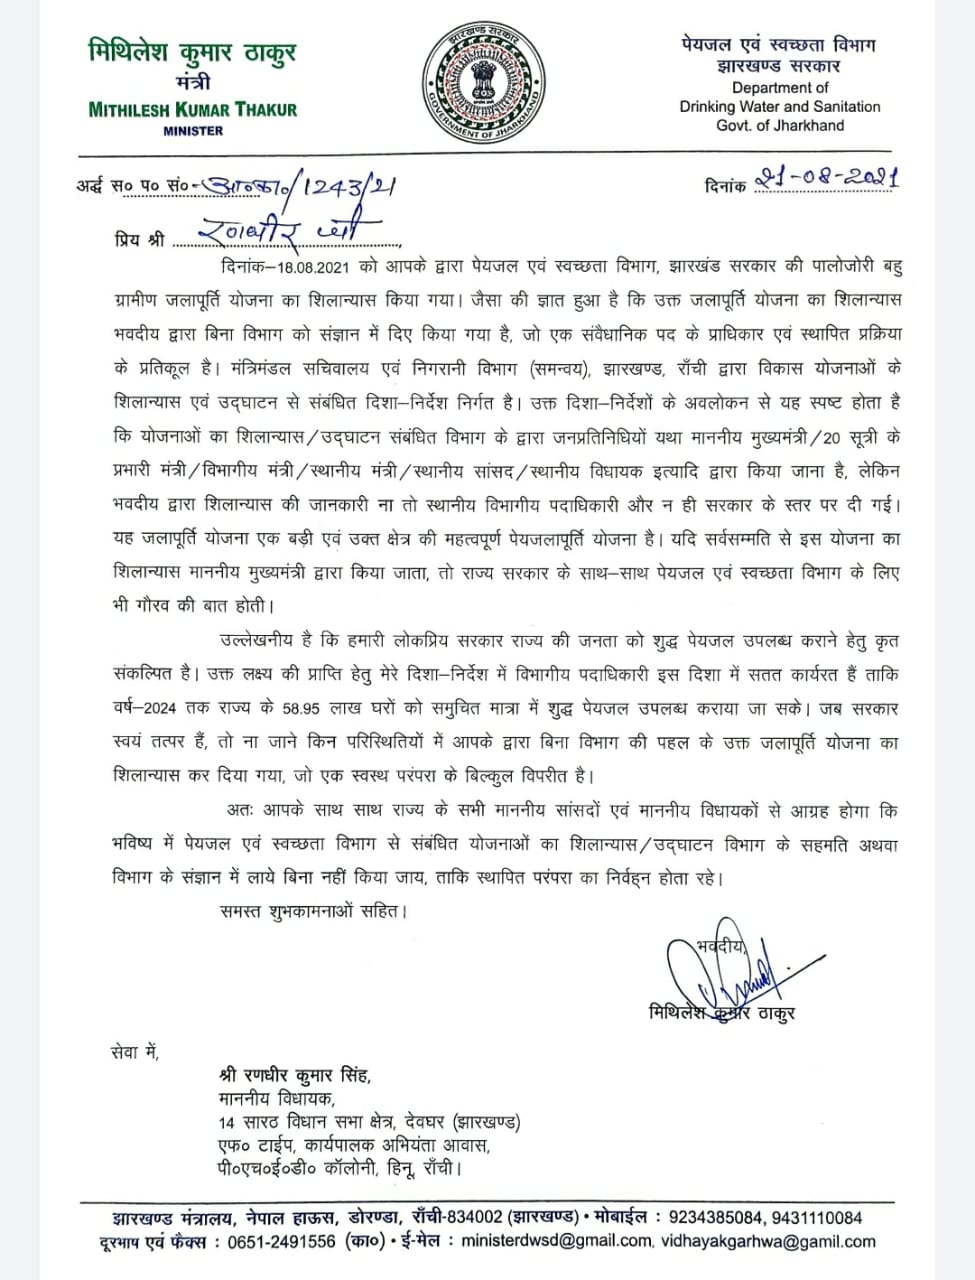 Minister Mithilesh Thakur wrote a letter to BJP MLA Randhir Singh in Ranchi